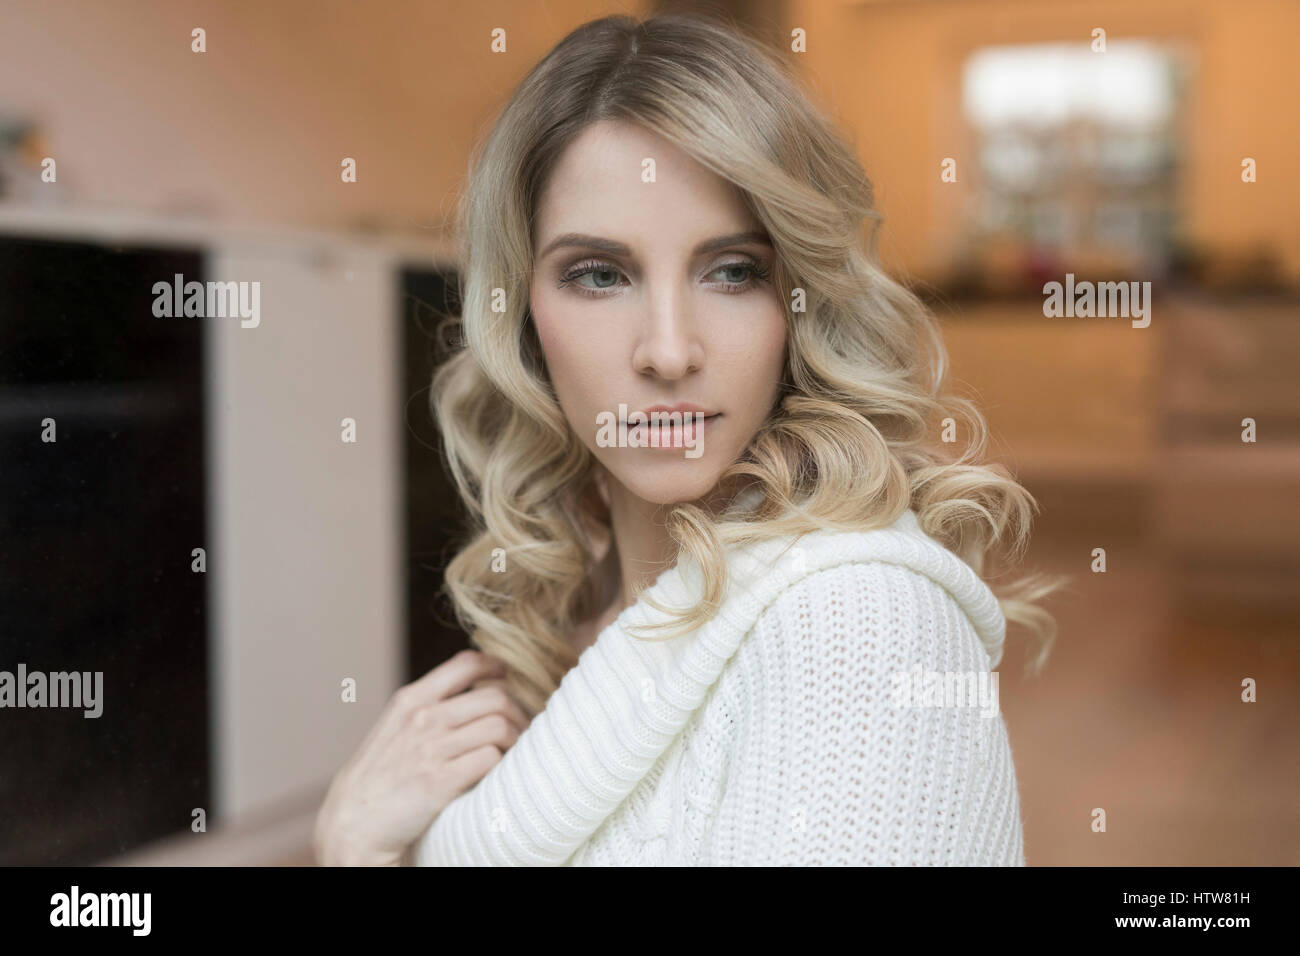 Portrait of a blond woman in the kitchen Stock Photo